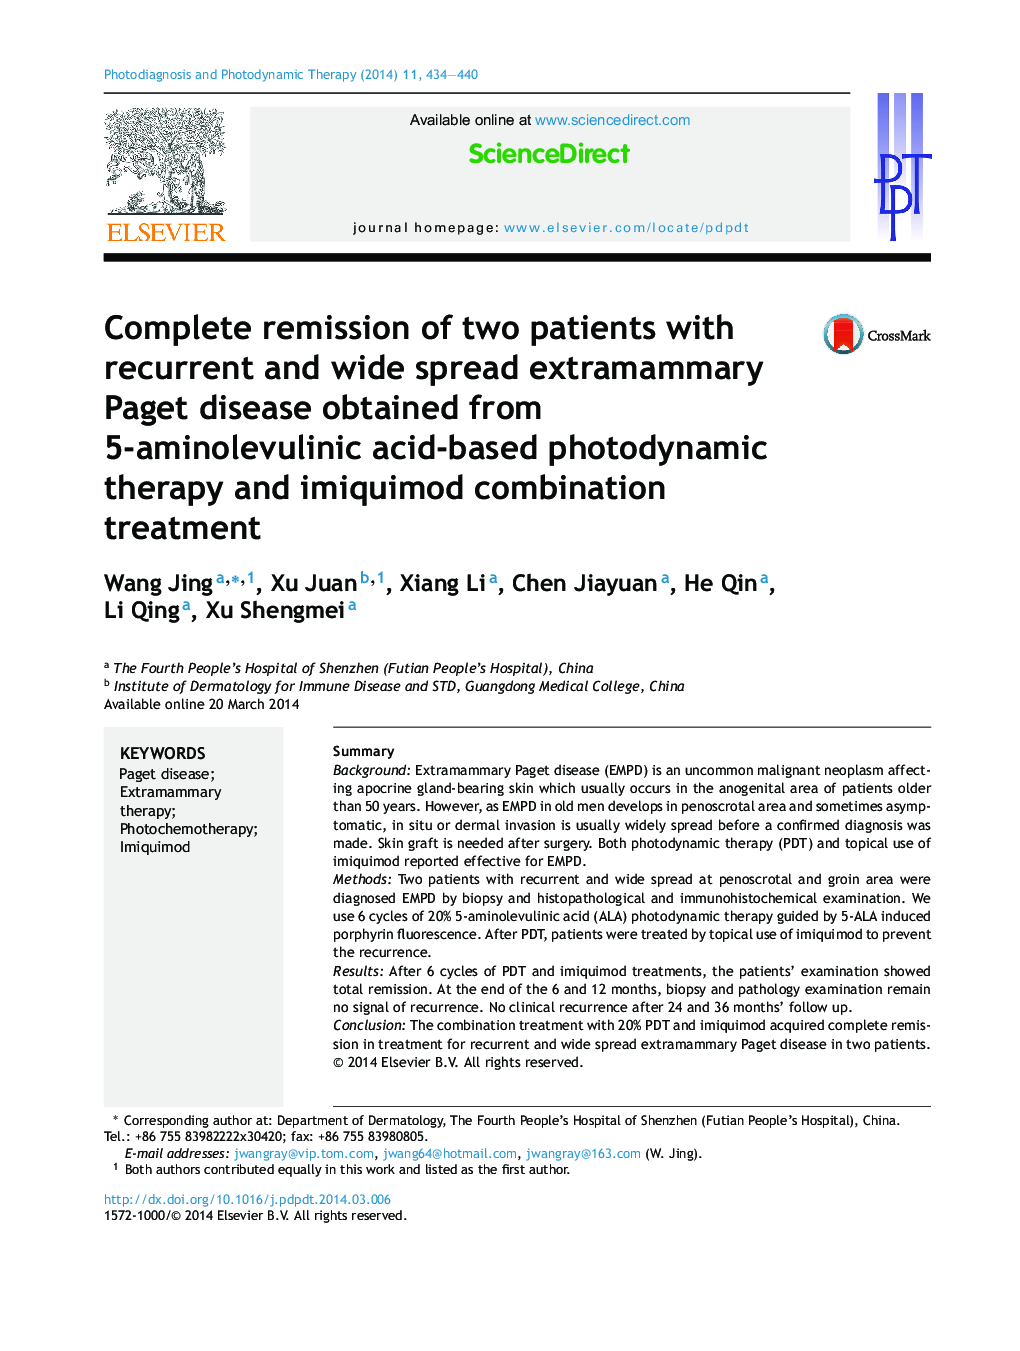 Complete remission of two patients with recurrent and wide spread extramammary Paget disease obtained from 5-aminolevulinic acid-based photodynamic therapy and imiquimod combination treatment